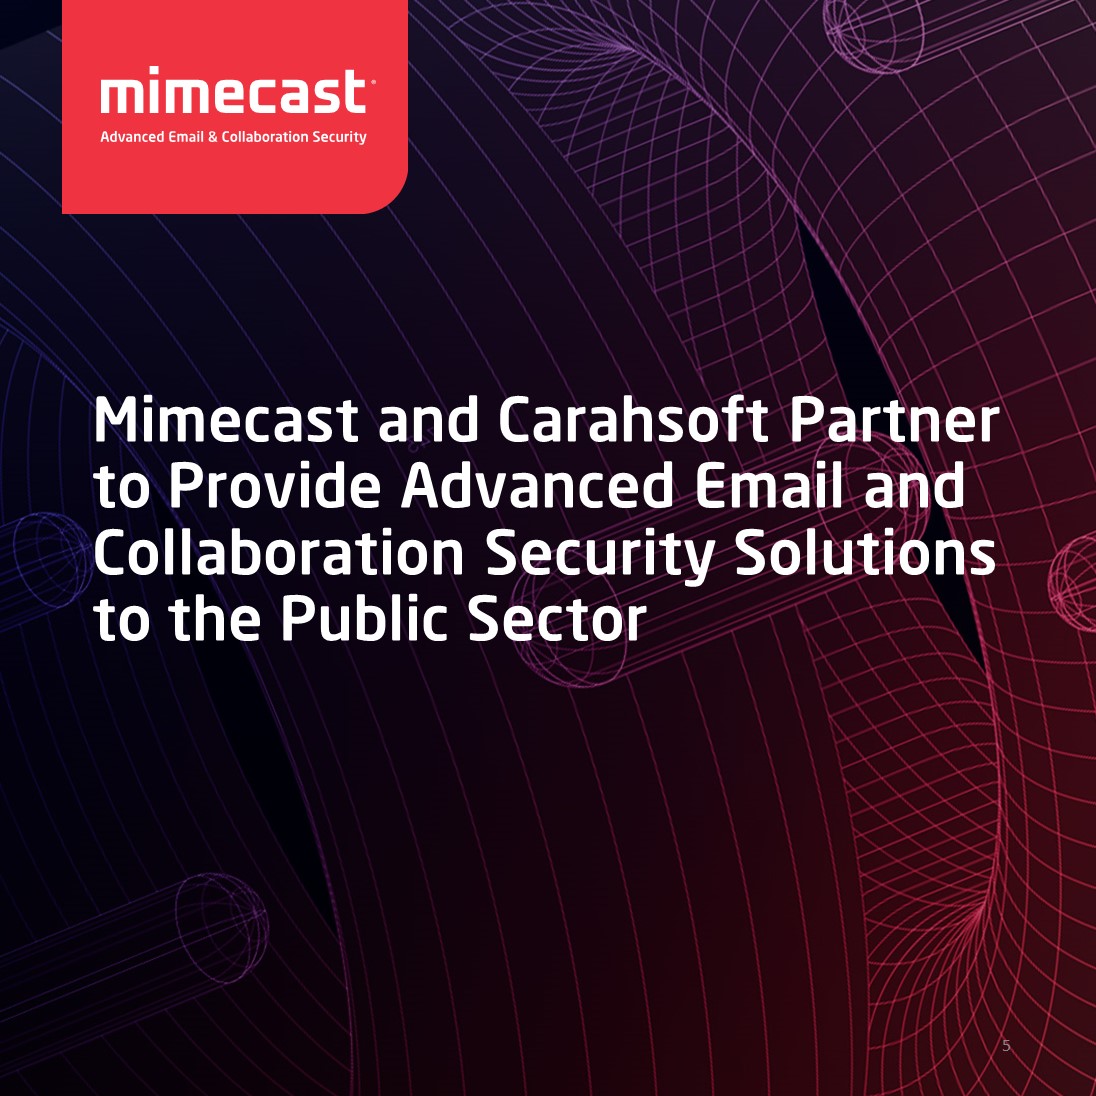 With Mimecast, federal, state and local government agencies can defend against even the most sophisticated cyber threats with AI-powered email security. Read more about today’s exciting announcement with @Carahsoft here: bit.ly/3NtaGpG